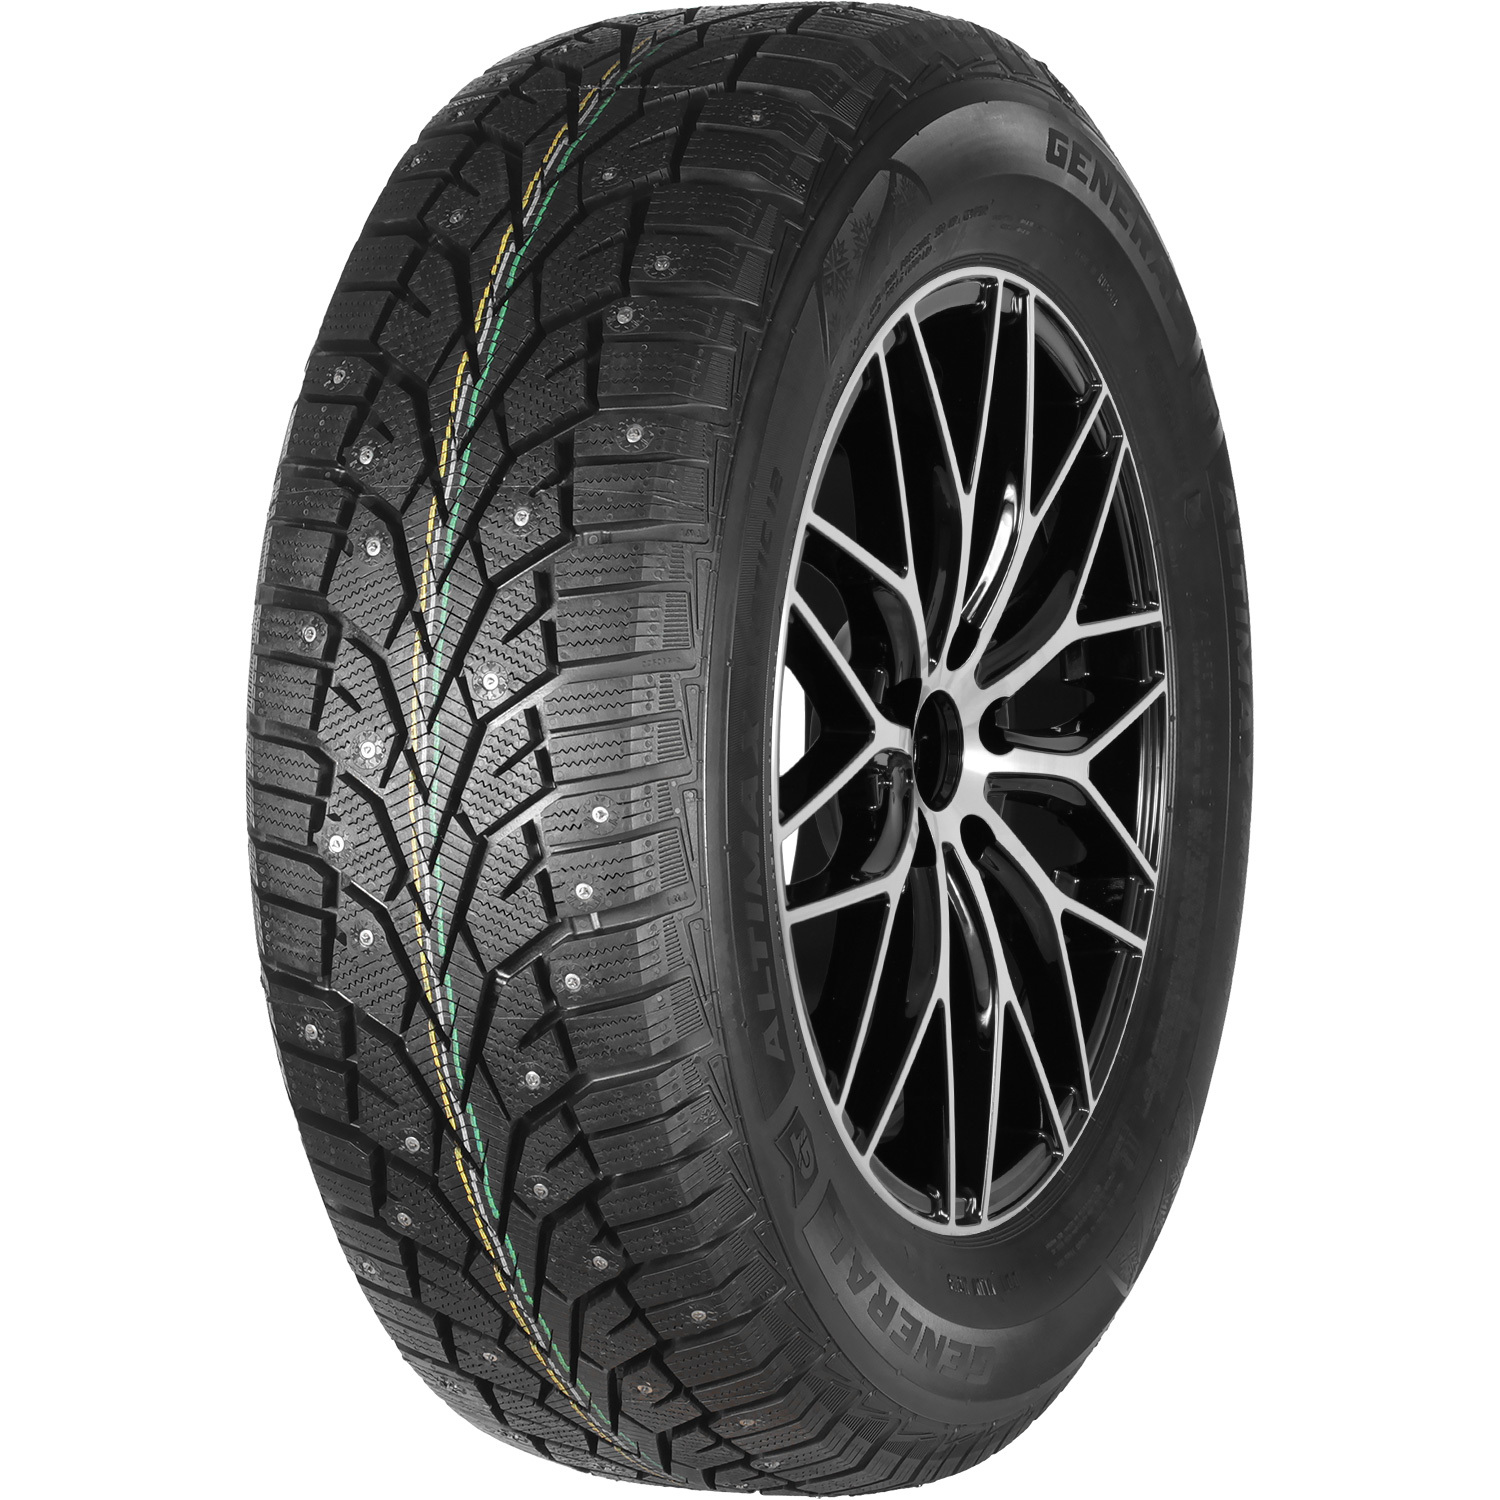 Автомобильная шина General Tire Altimax Arctic 12 205/65 R15 99T Шипованные tire cover central ocean sunrise sun moon spare tire cover select tire size back up camera in menu custom sized to any